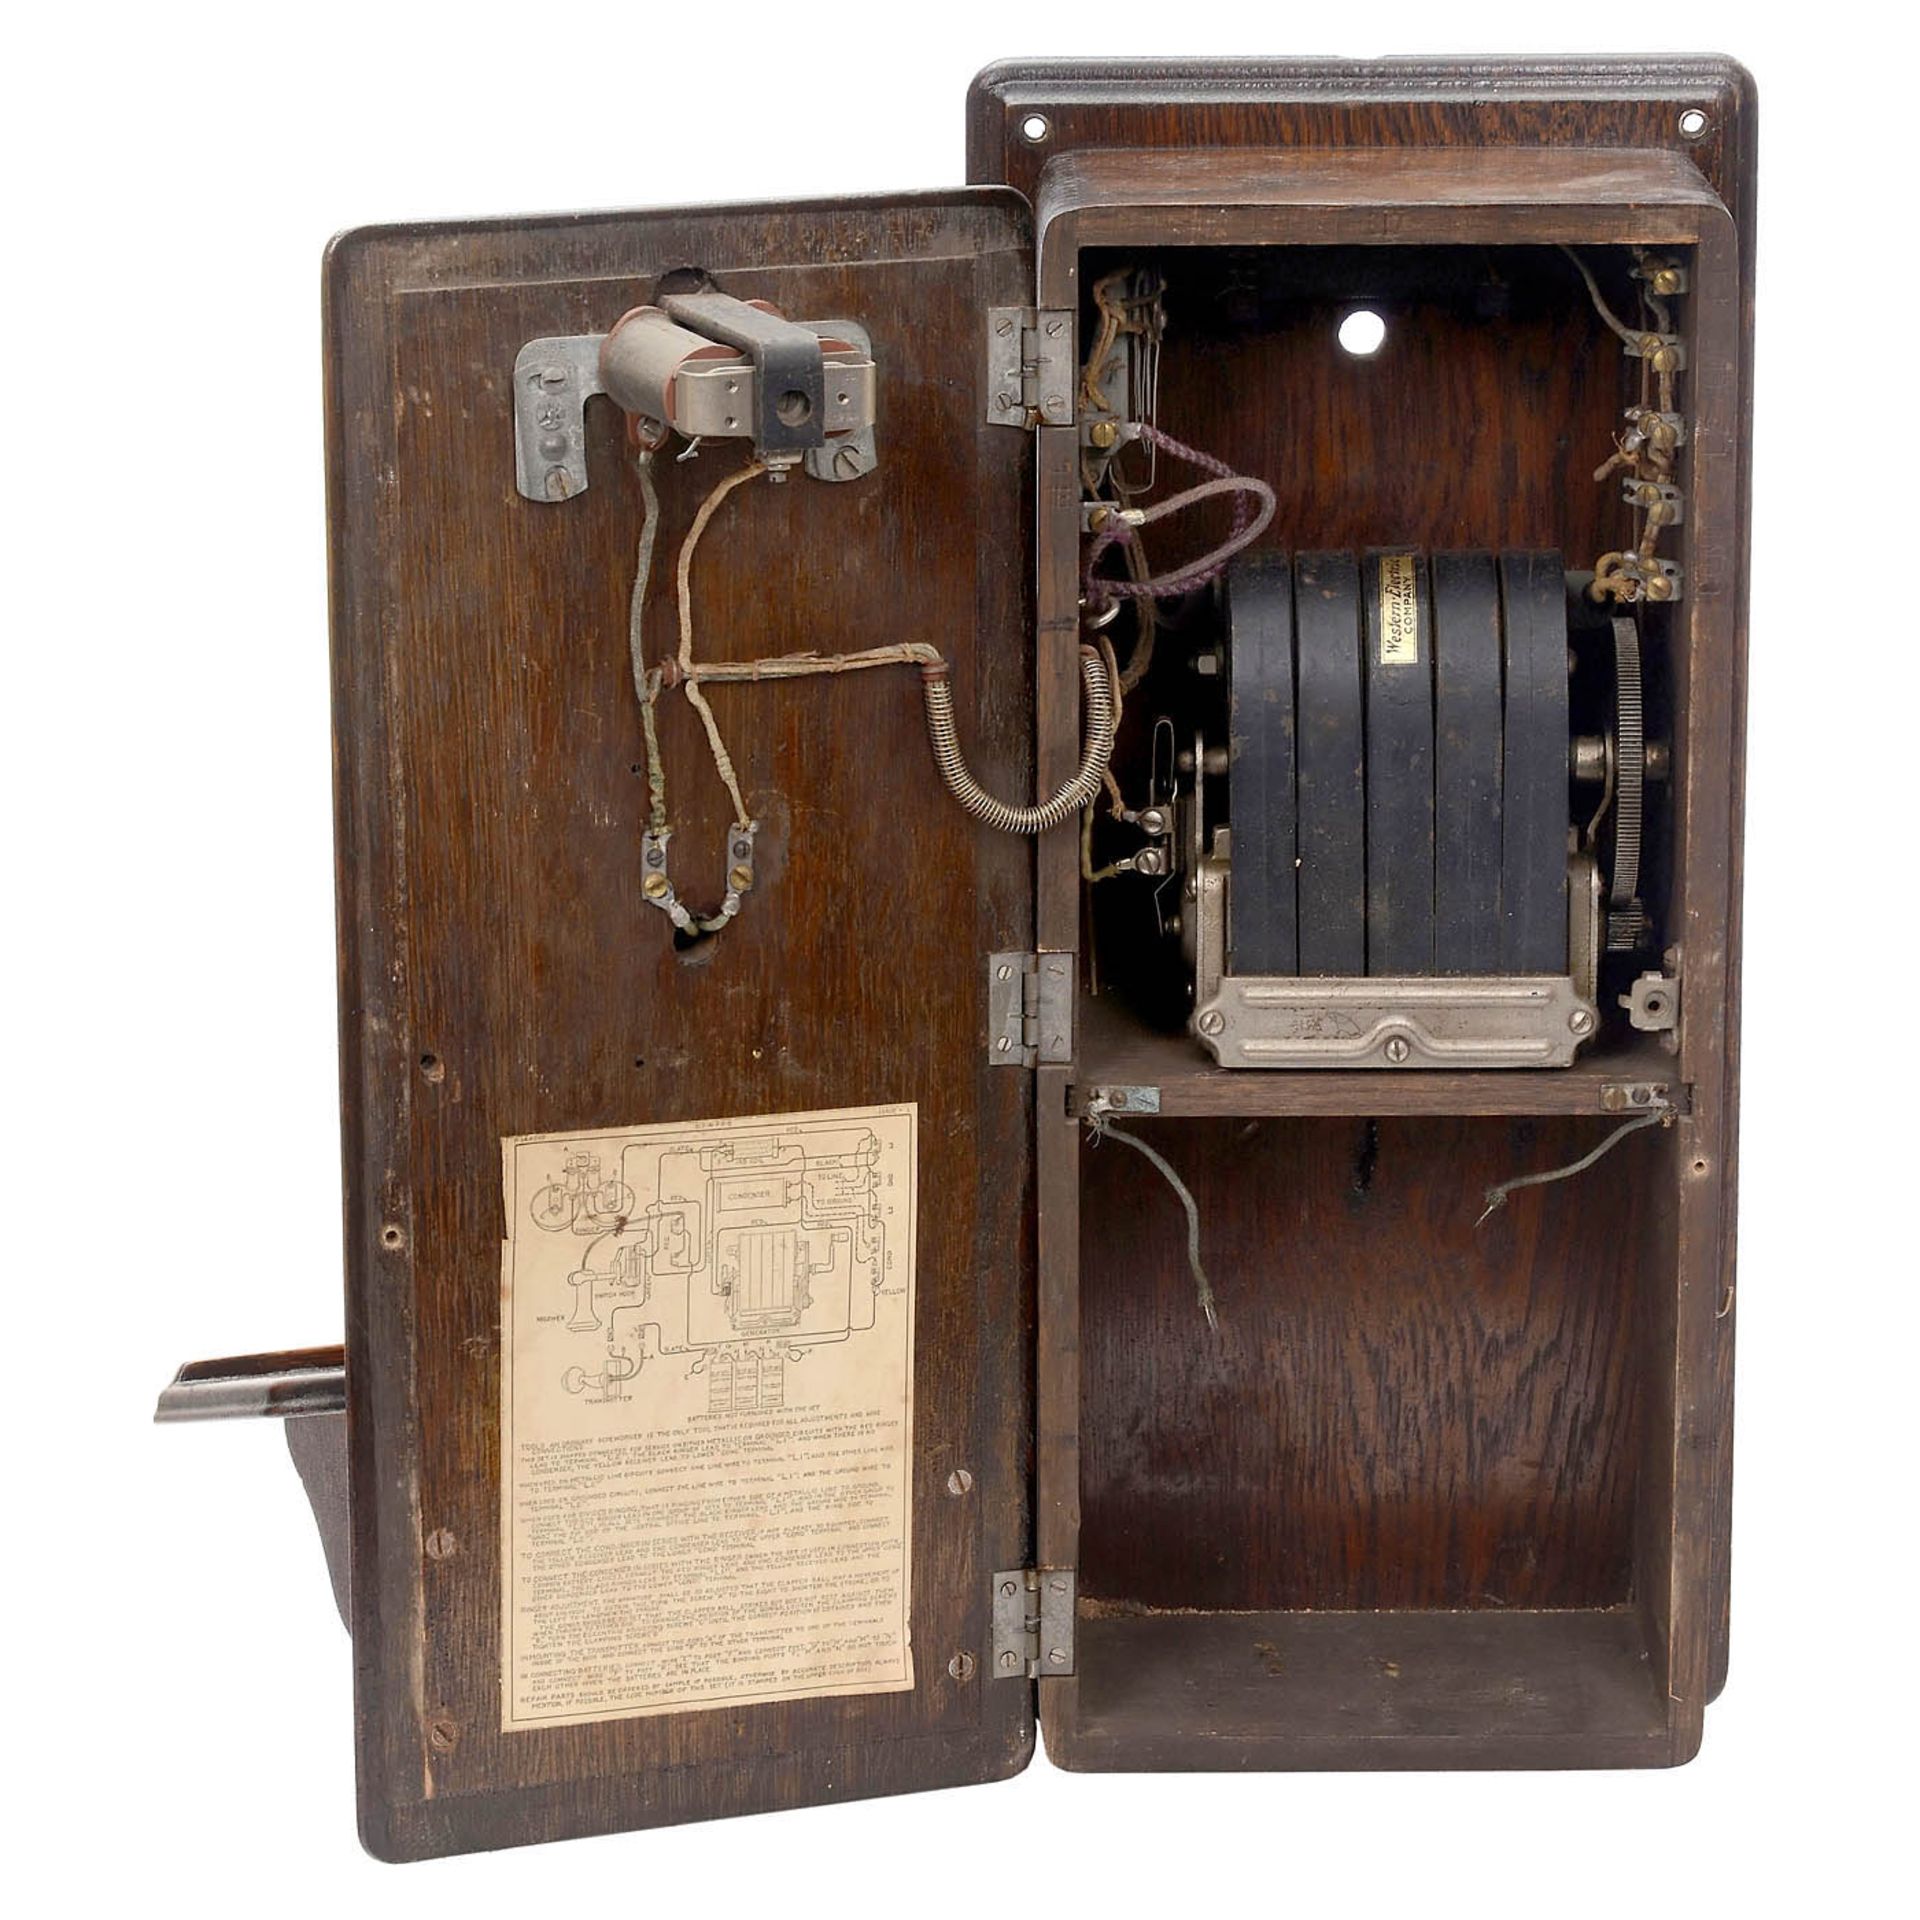 Western Electric Company Wall Telephone, c. 1913 - Image 2 of 2